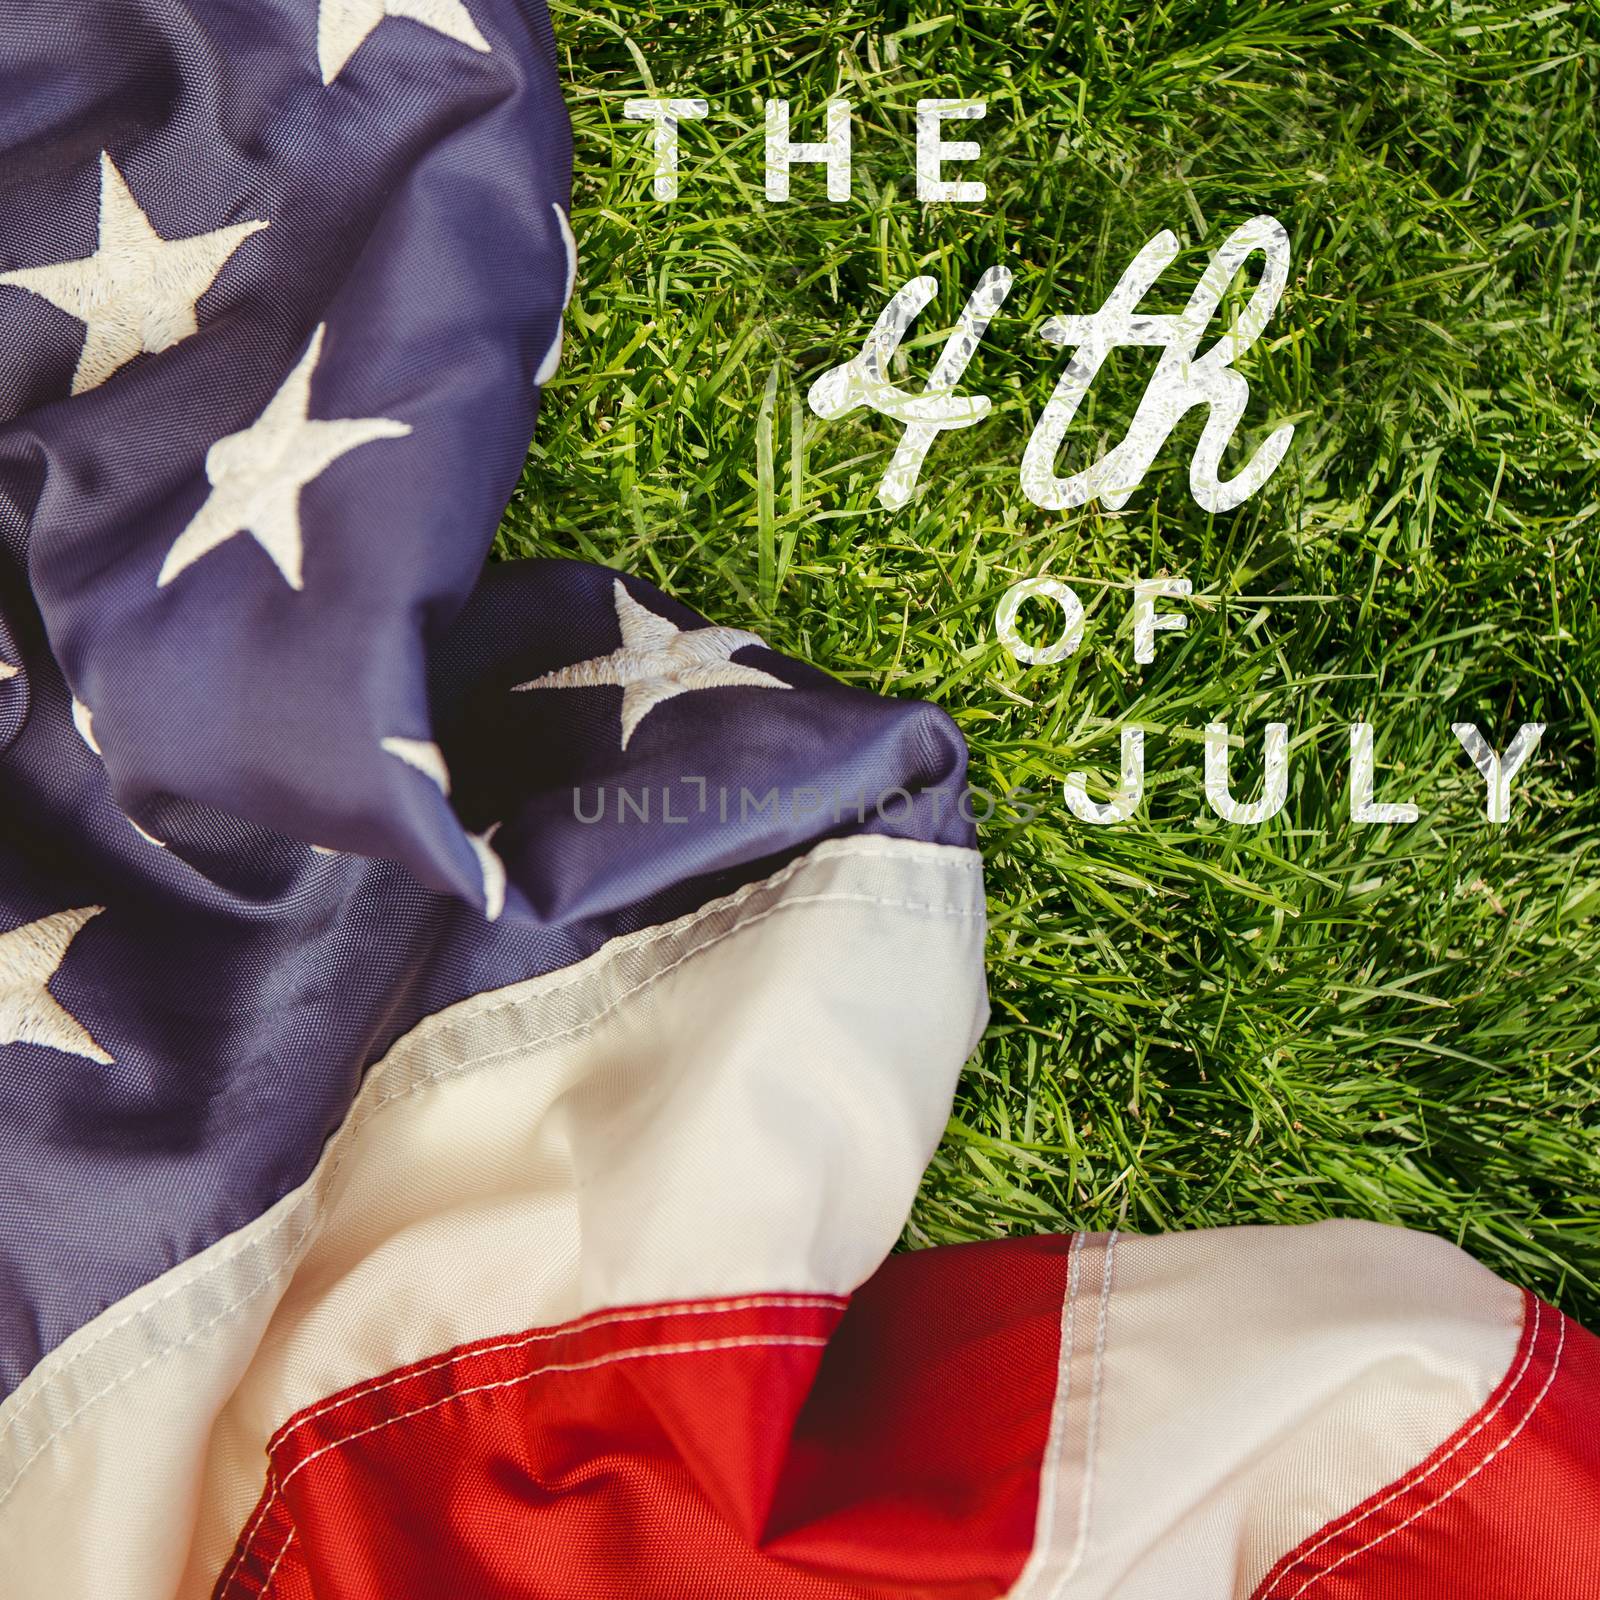 Colorful happy 4th of july text against white background against grass background